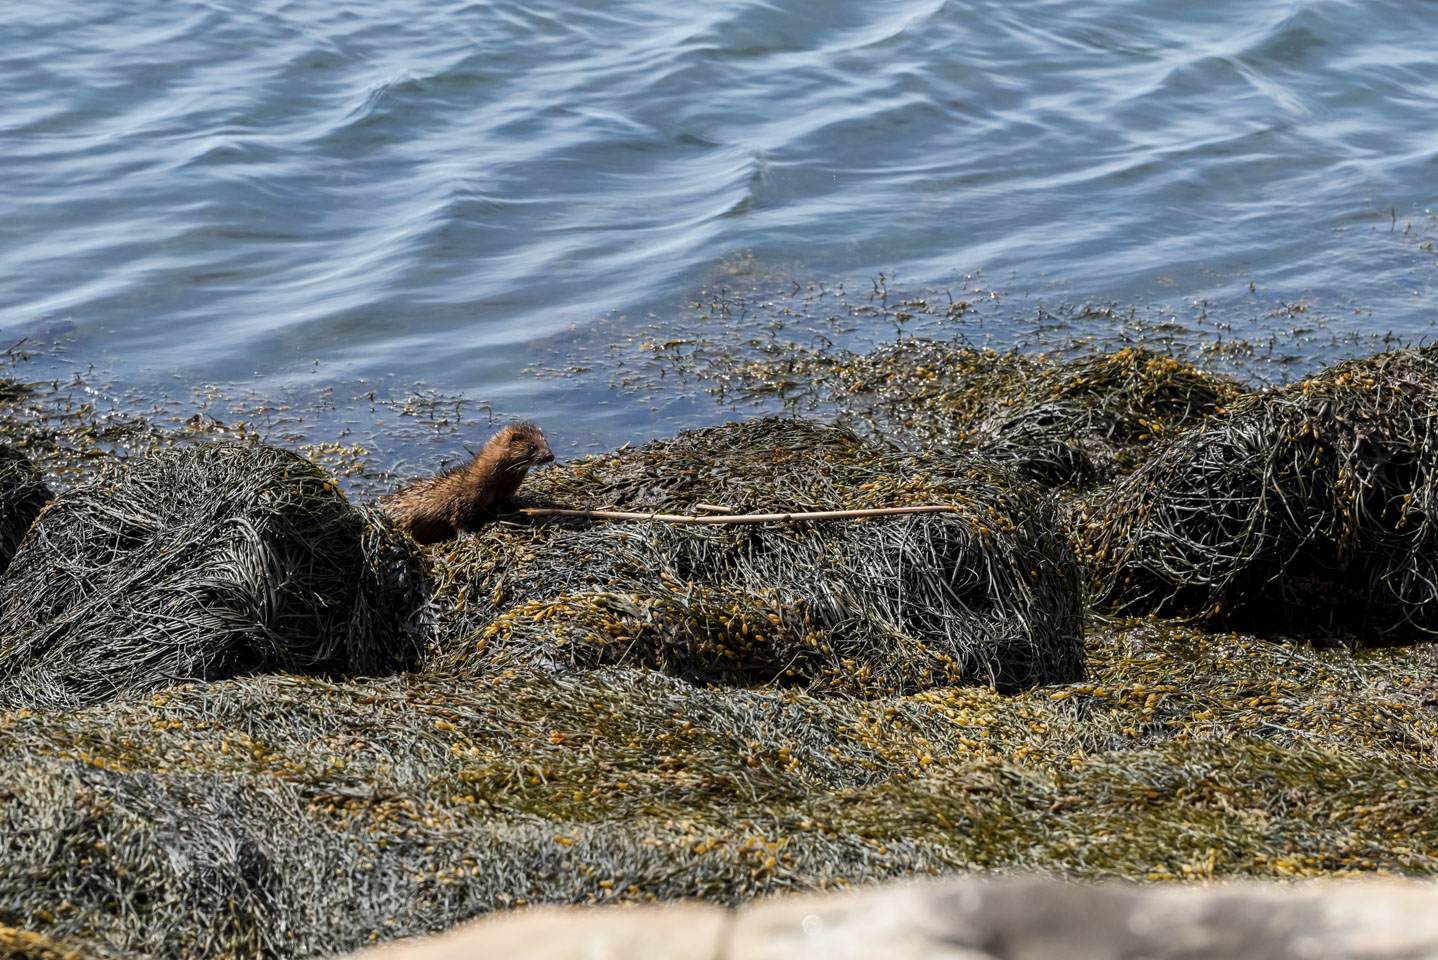 A mink at the edge of the water